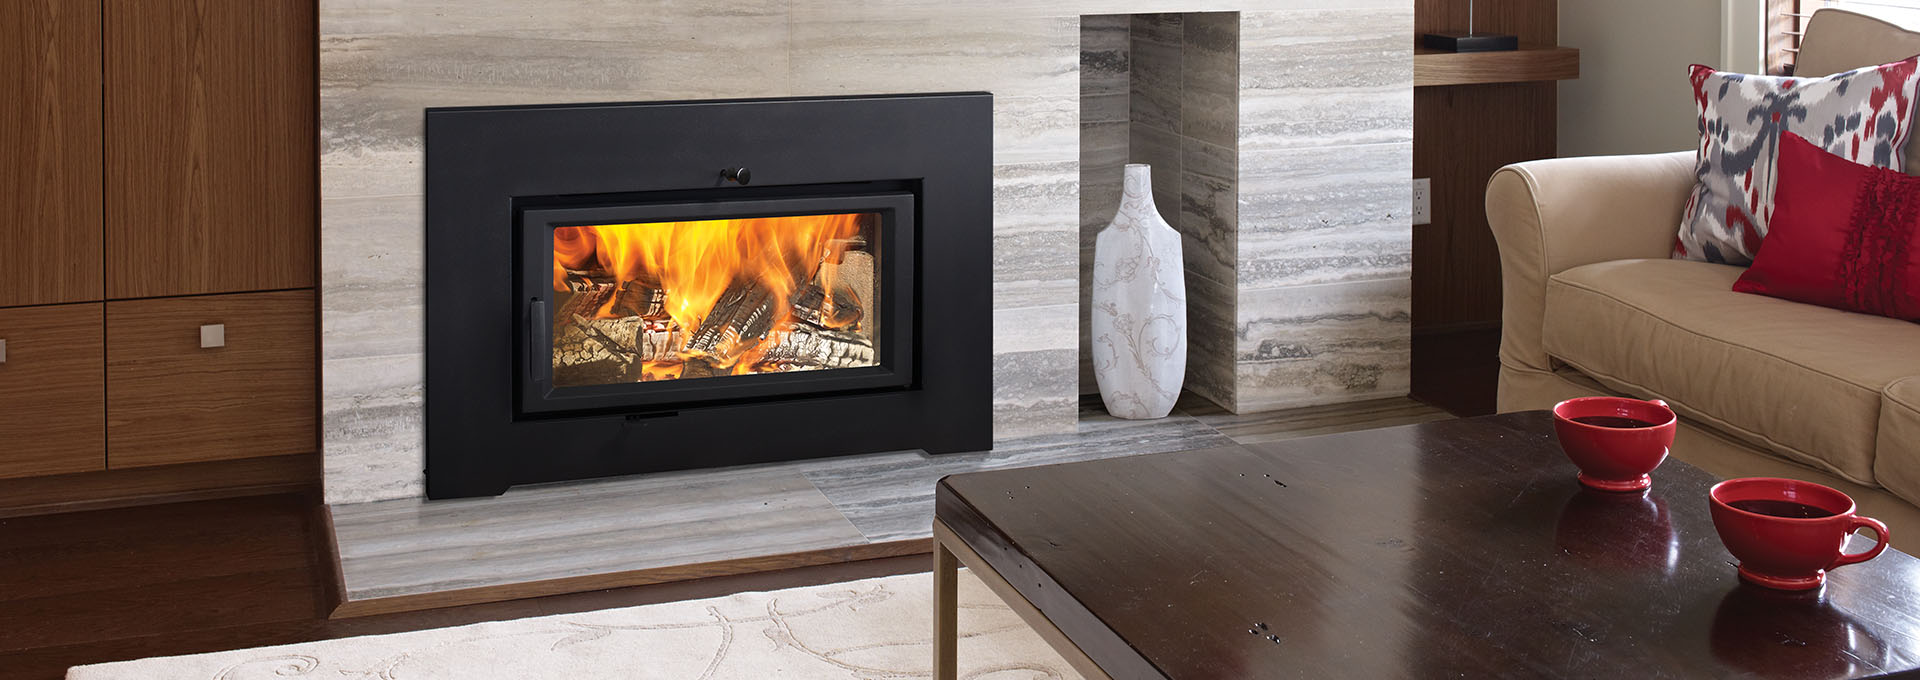 How to Build A Wood Burning Fireplace From Scratch Luxury Wood Inserts Epa Certified